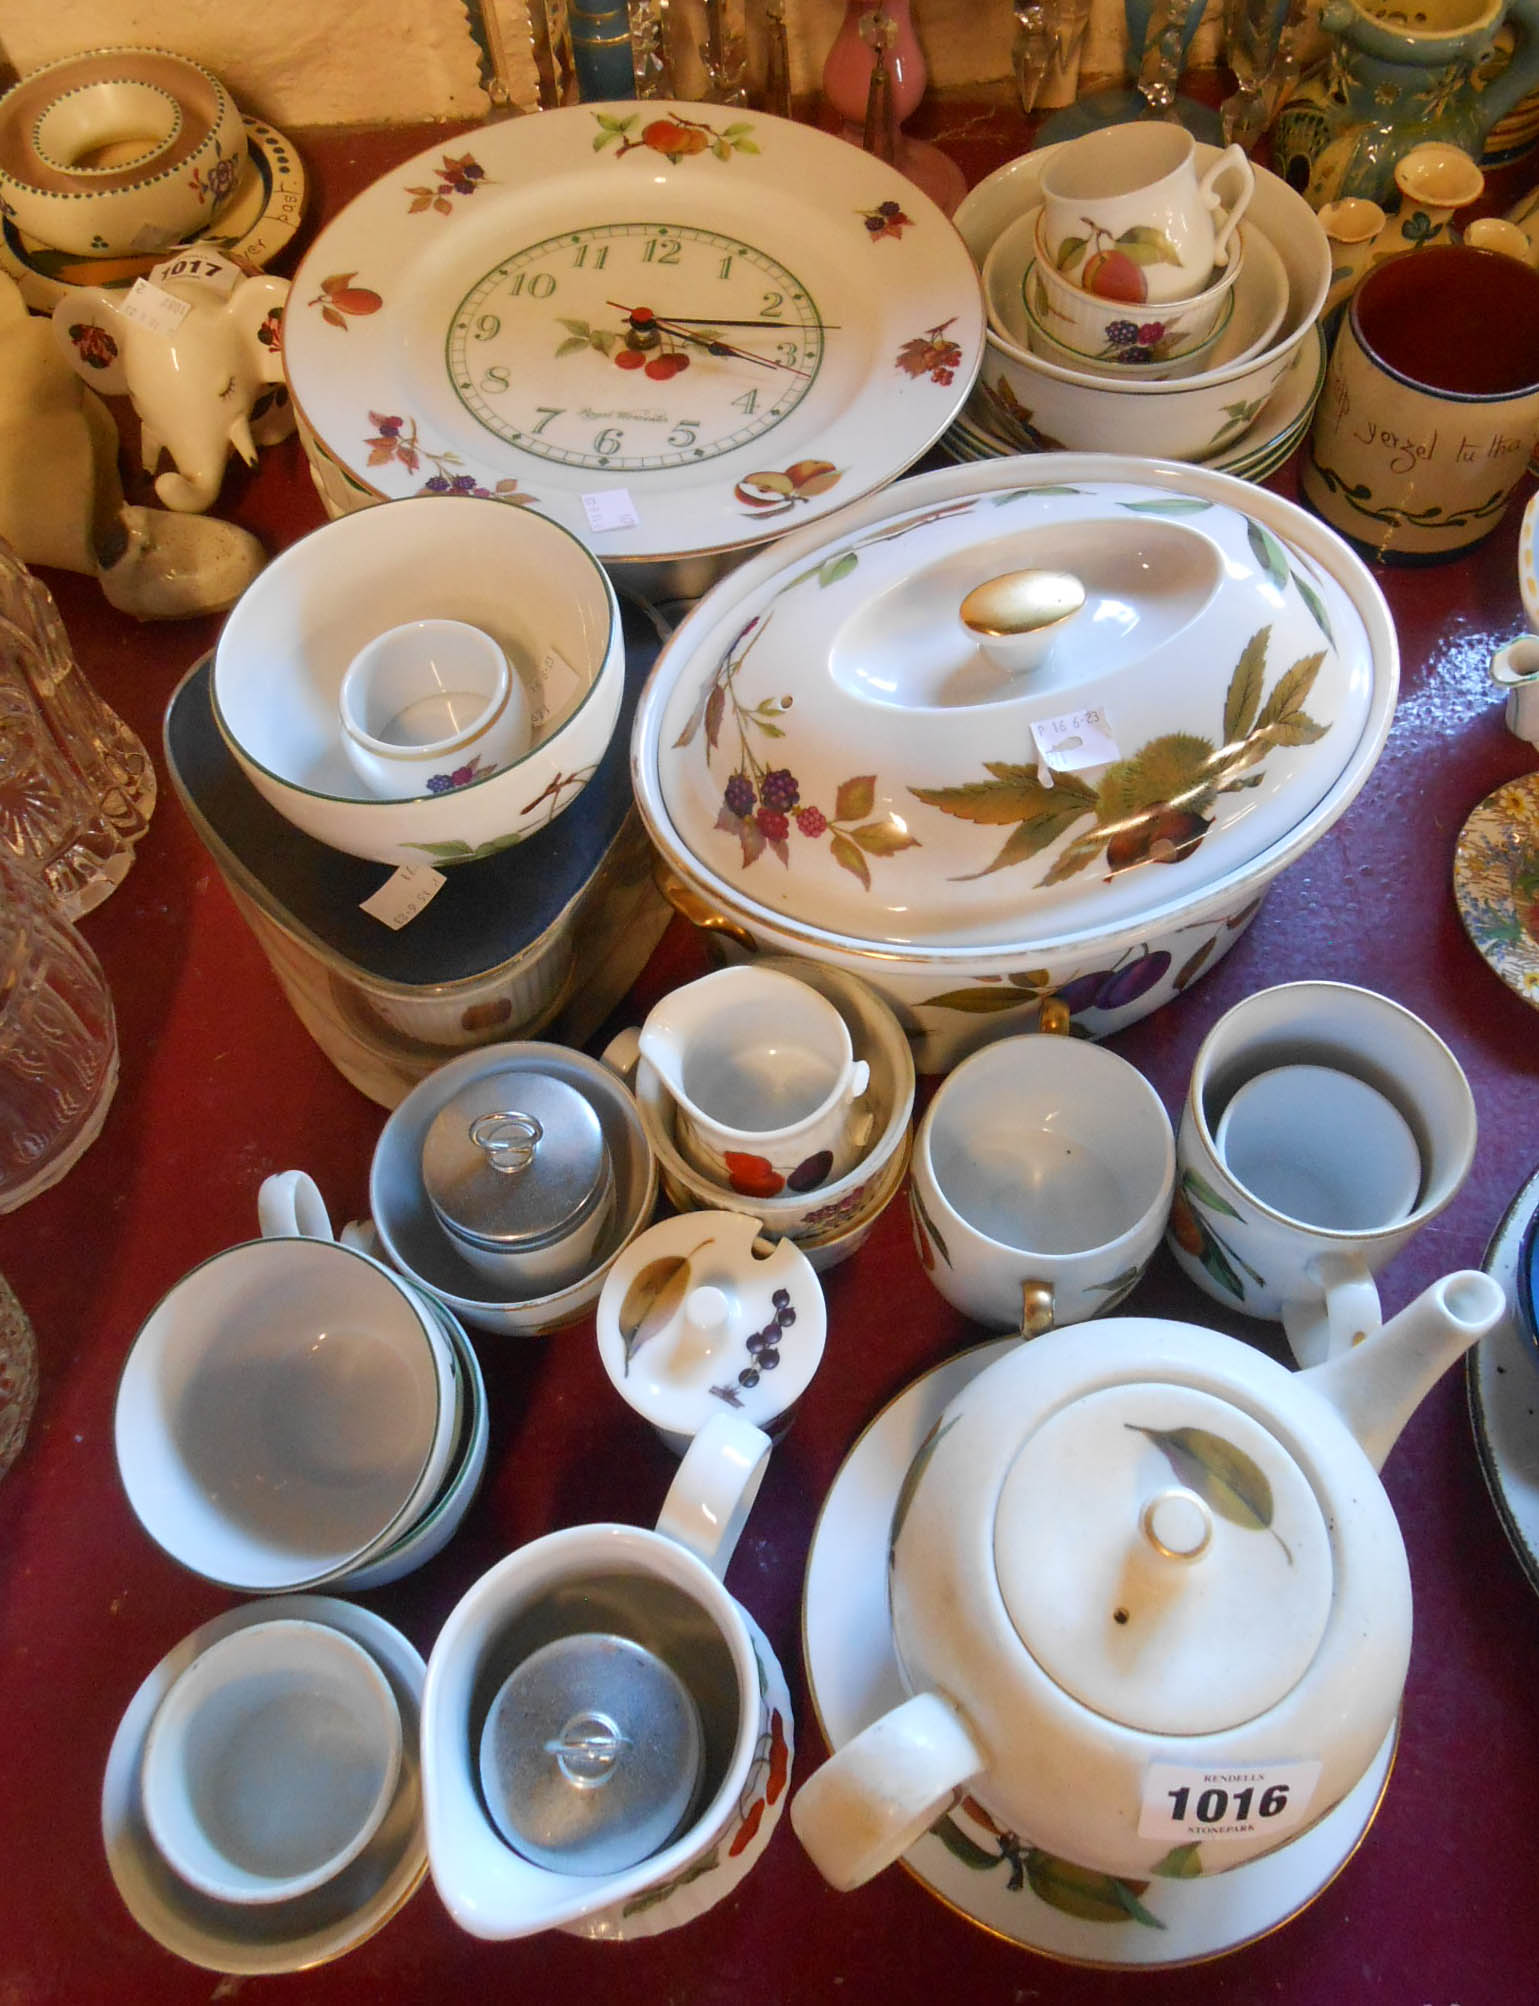 A large quantity of Royal Worcester Evesham oven-to-table ware including flan dishes, lidded